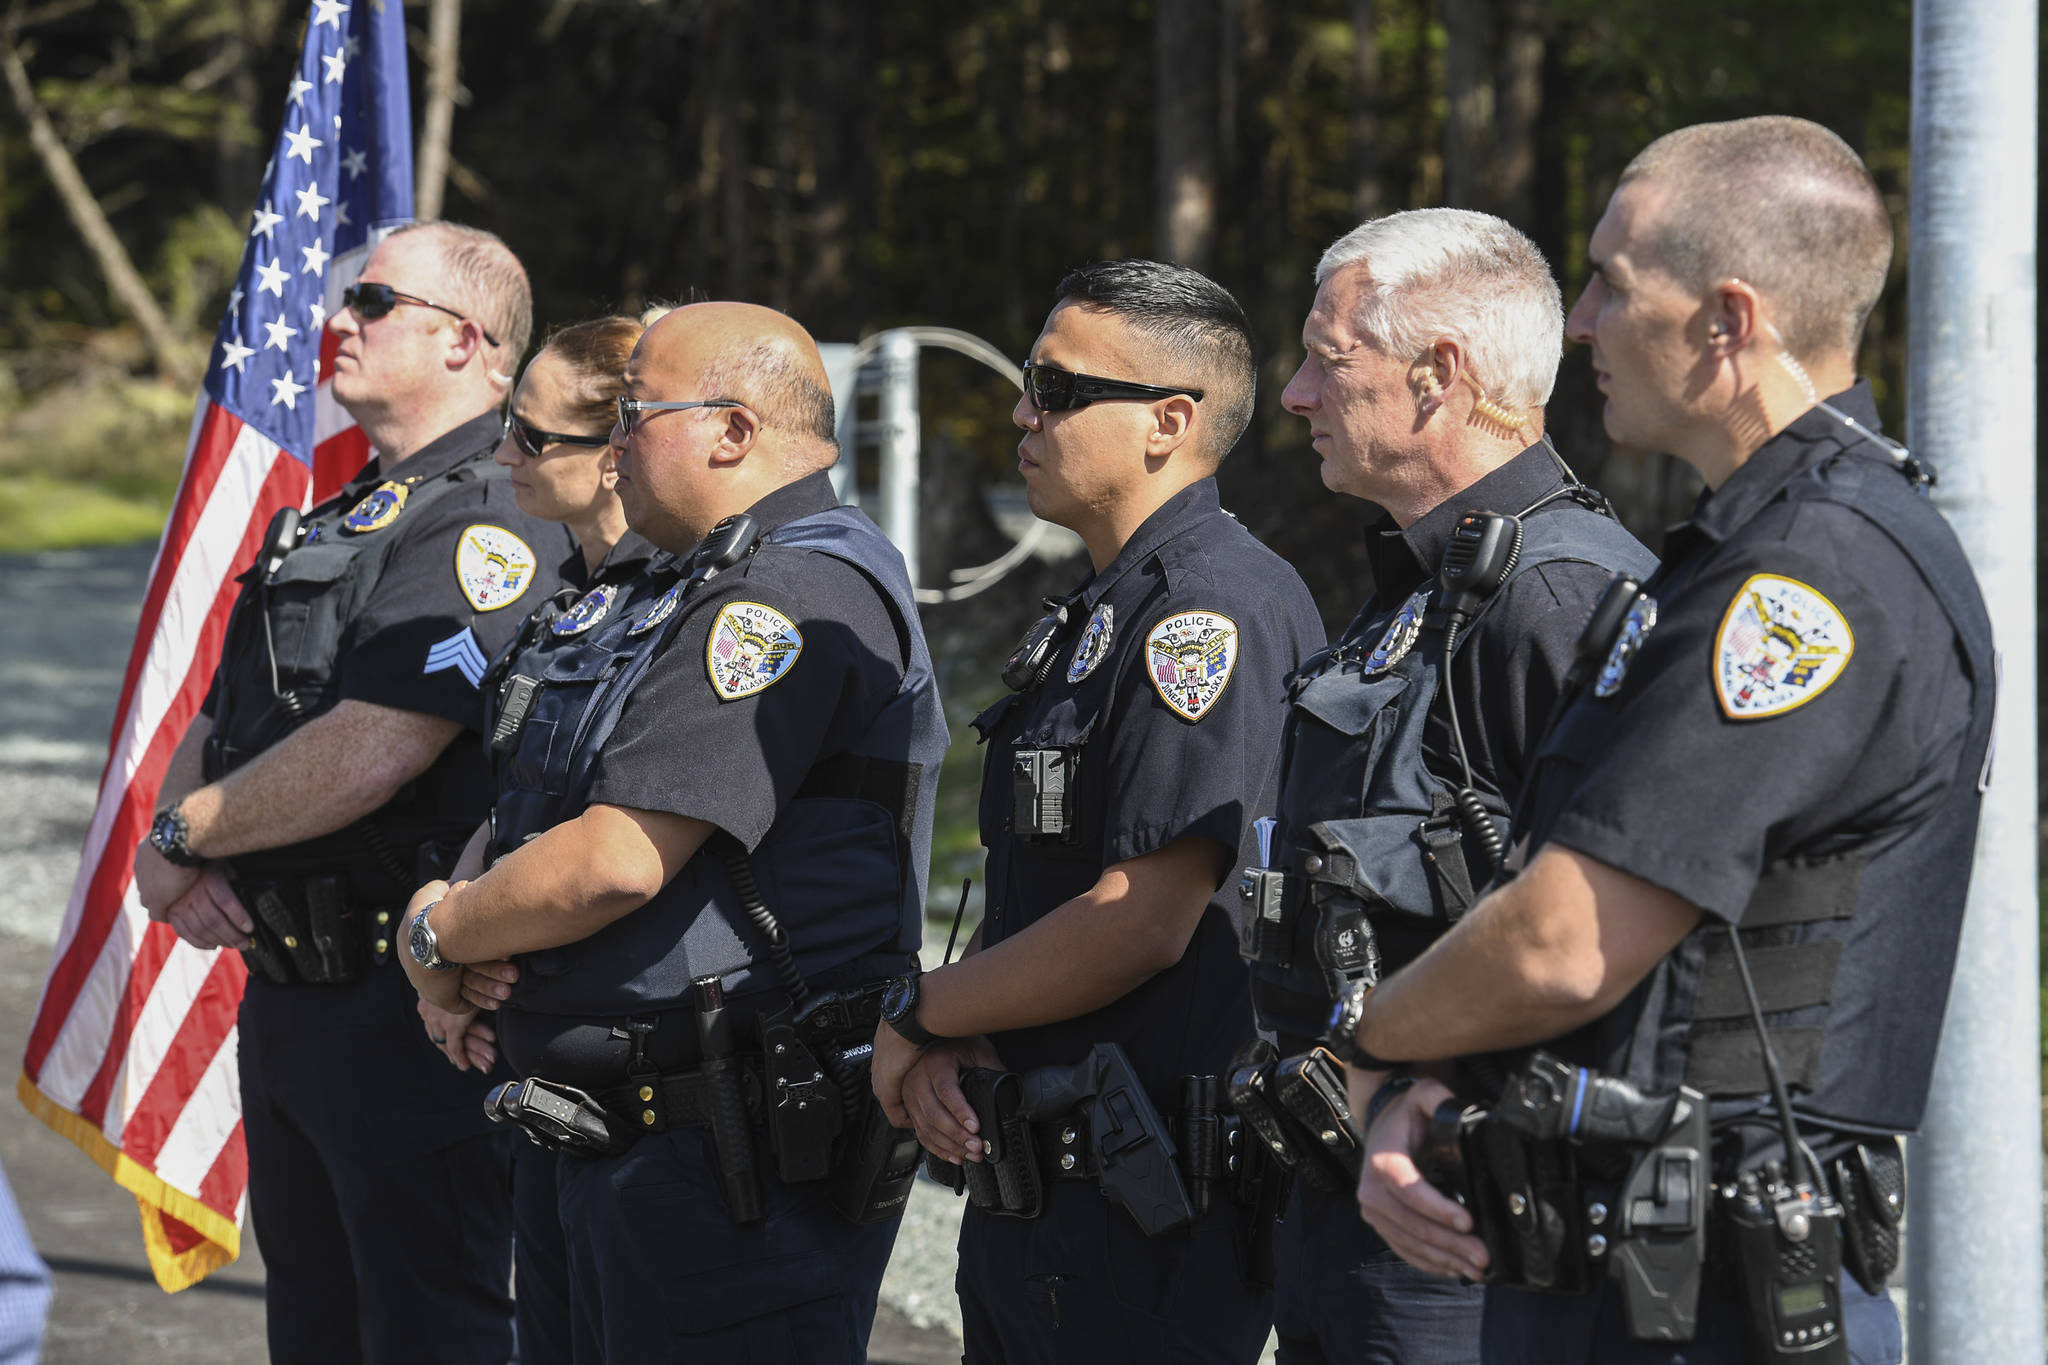 Juneau Police Department officers attend a ribbon-cutting ceremony on Karl Reishus Boulevard to commemorate the near completion of the Pederson Hill Subdivision on Friday, Sept. 6, 2019. Reishus was a Juneau Police Department officer who died in 1992 when he fell from a 40-foot tower during a training exercise. (Michael Penn | Juneau Empire)